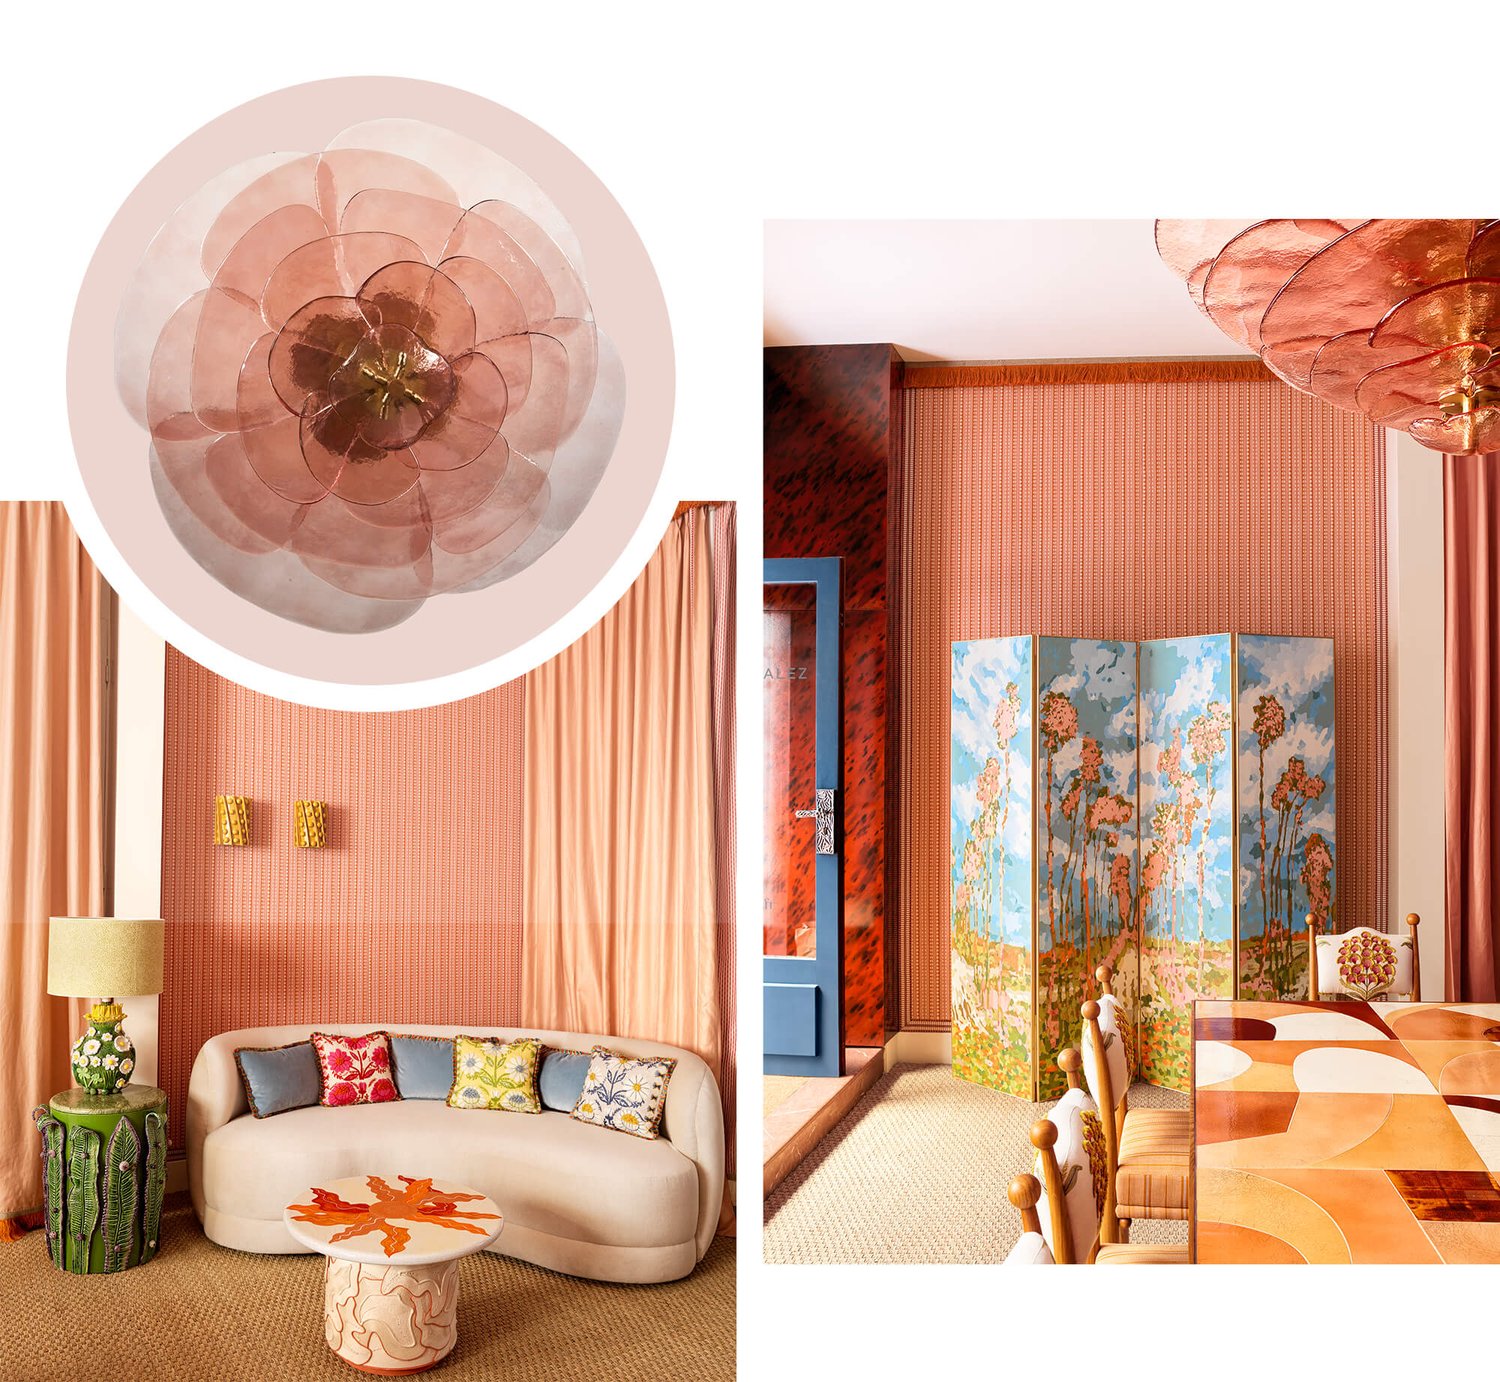 Three images: Inset image of glass chandelier shaped like petals of a rose. Larger image on left is of a curved couch in a living room. Image on right is of an inlaid dining table with upholstered chairs and a painted folding screen in background.